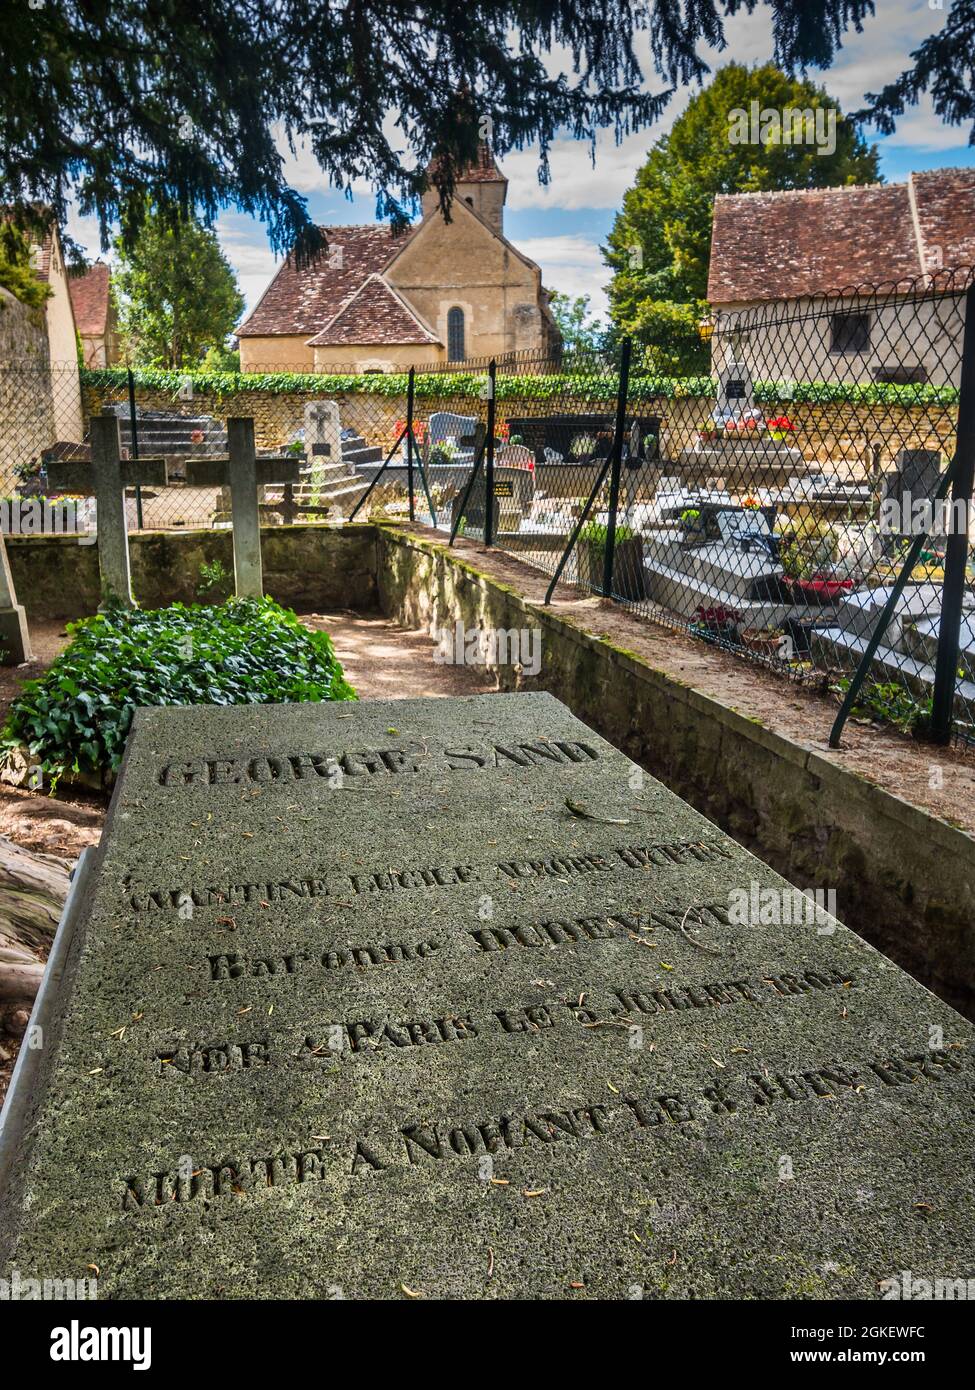 Burial tomb of famous 19th century writer George Sand, Nohant, Indre (36), France. Stock Photo